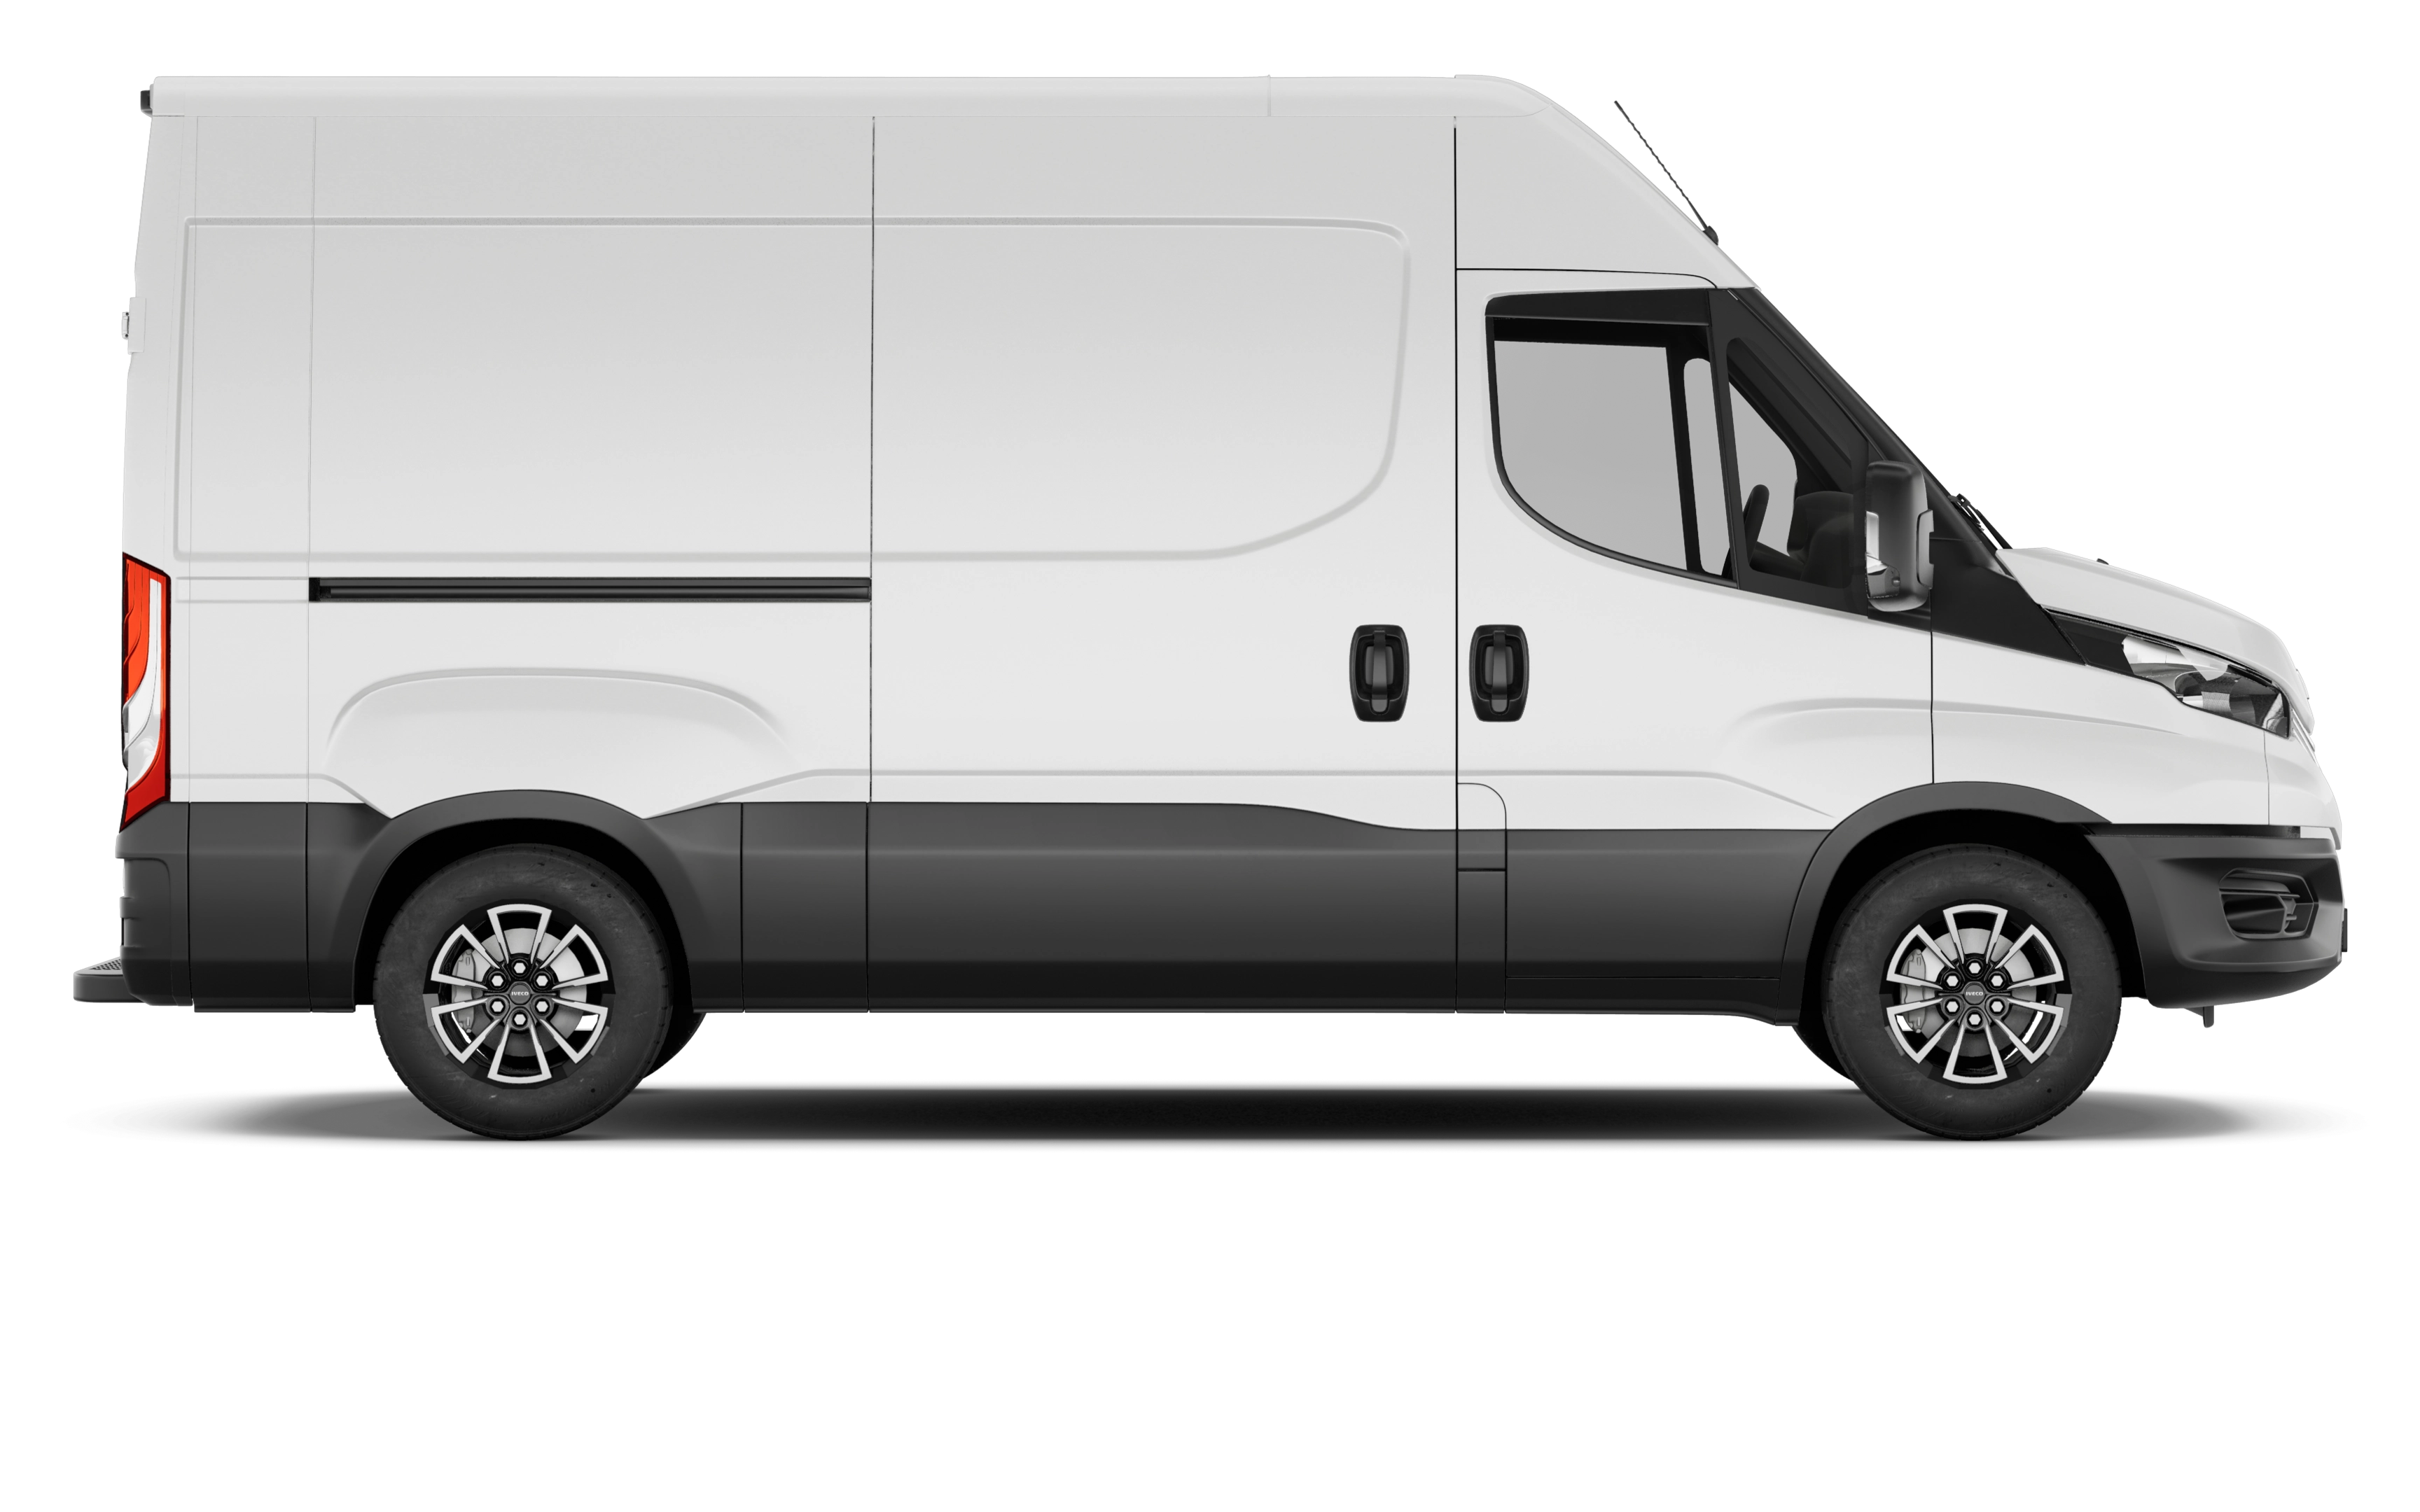 Iveco edaily 35s14 electric 140kw 74kwh high roof van 3520 wb auto [22kw]